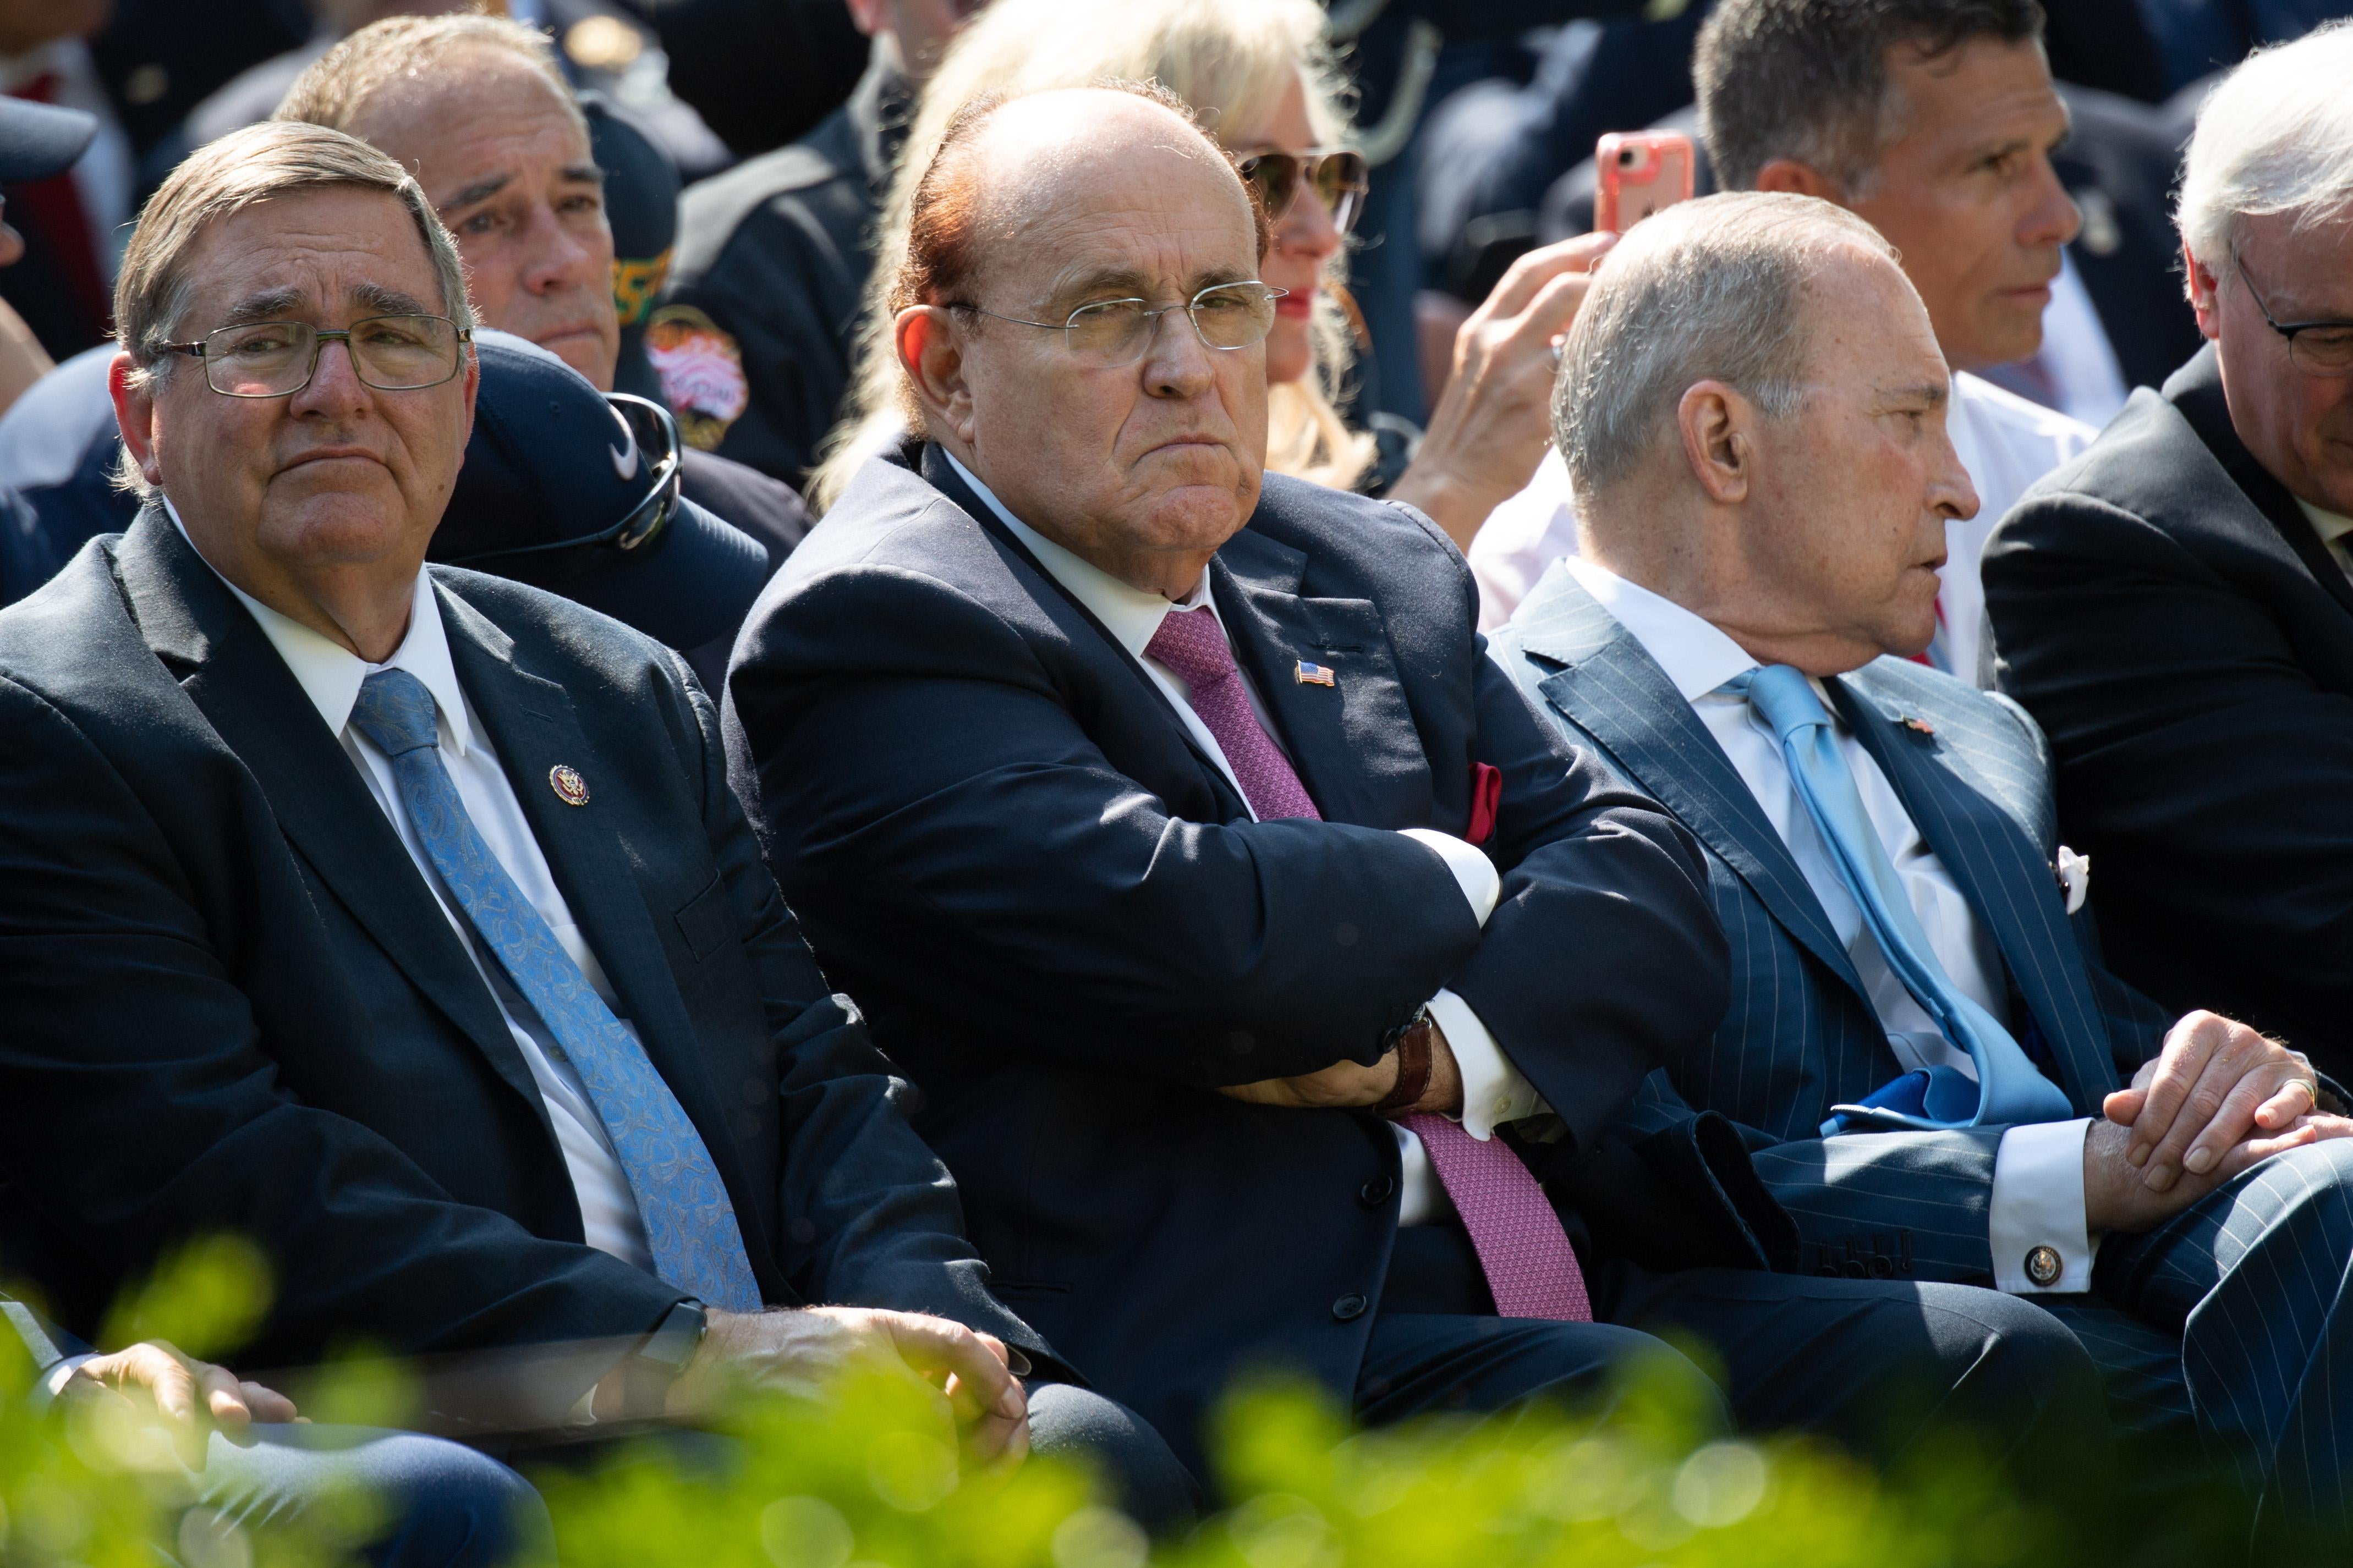 Former New York City Mayor Rudy Giuliani during a ceremony in the Rose Garden of the White House in Washington, DC, July 29, 2019. 